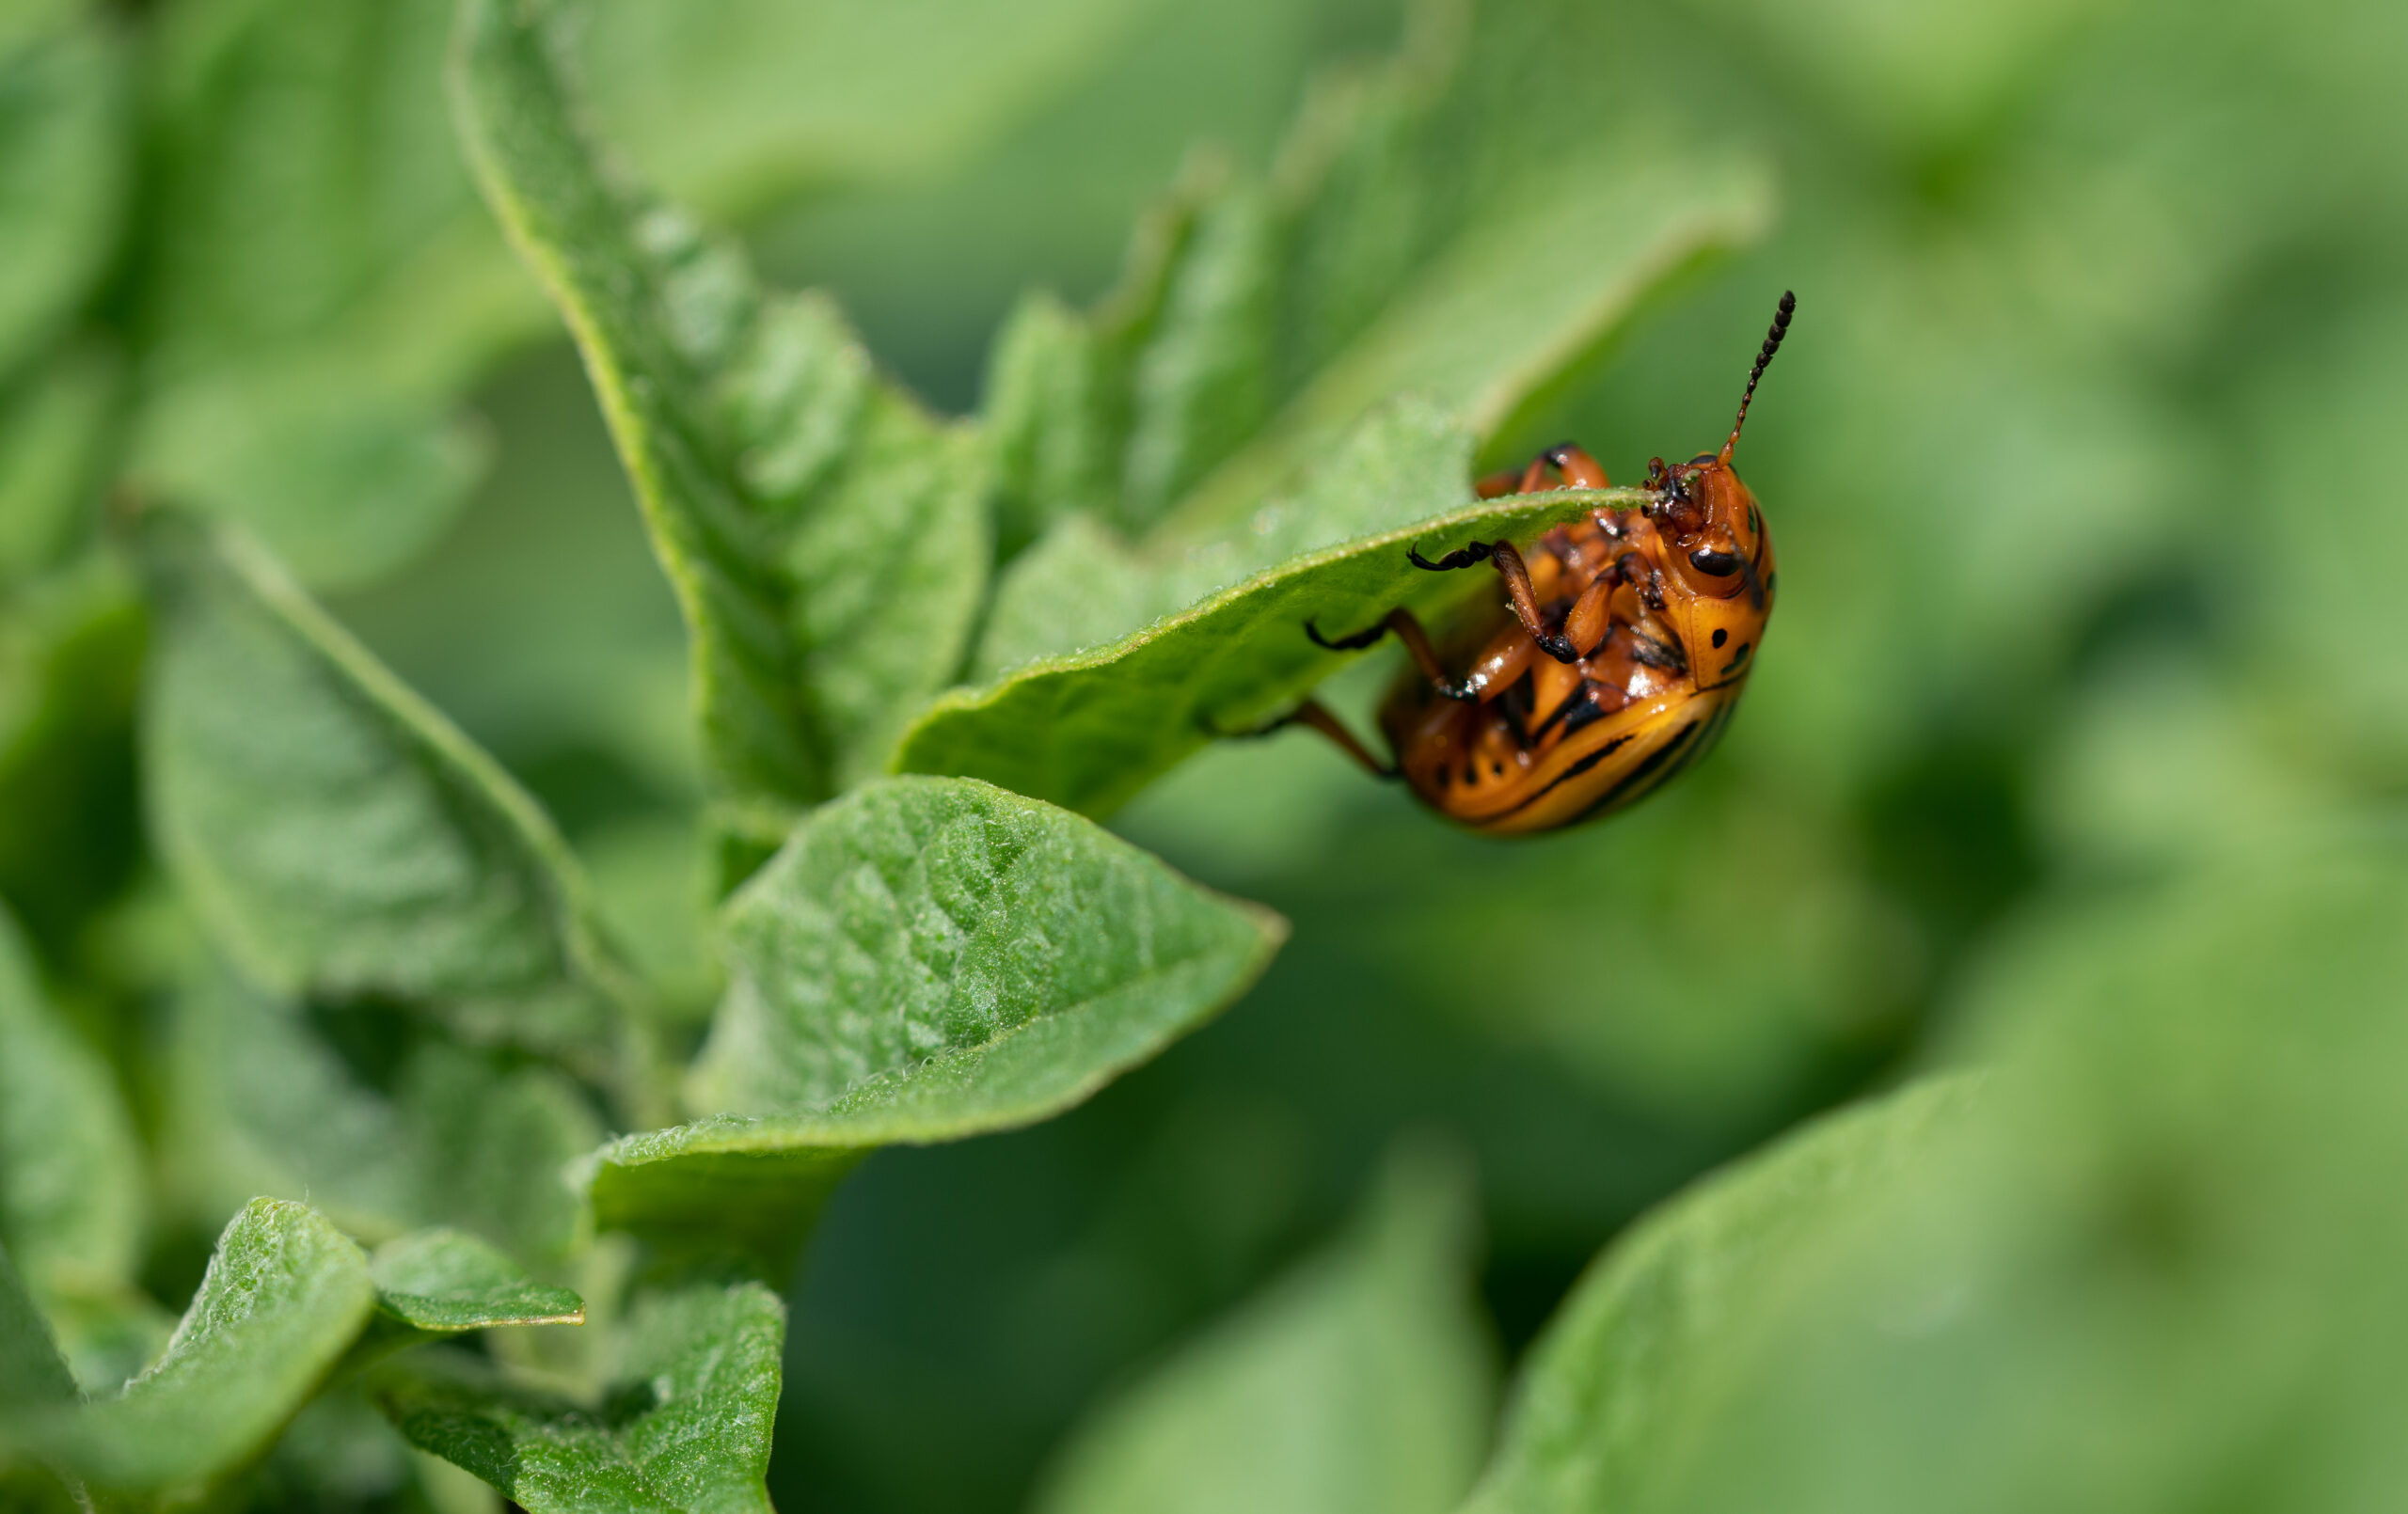 a potato beetle shows its understide while chewing on a leaf